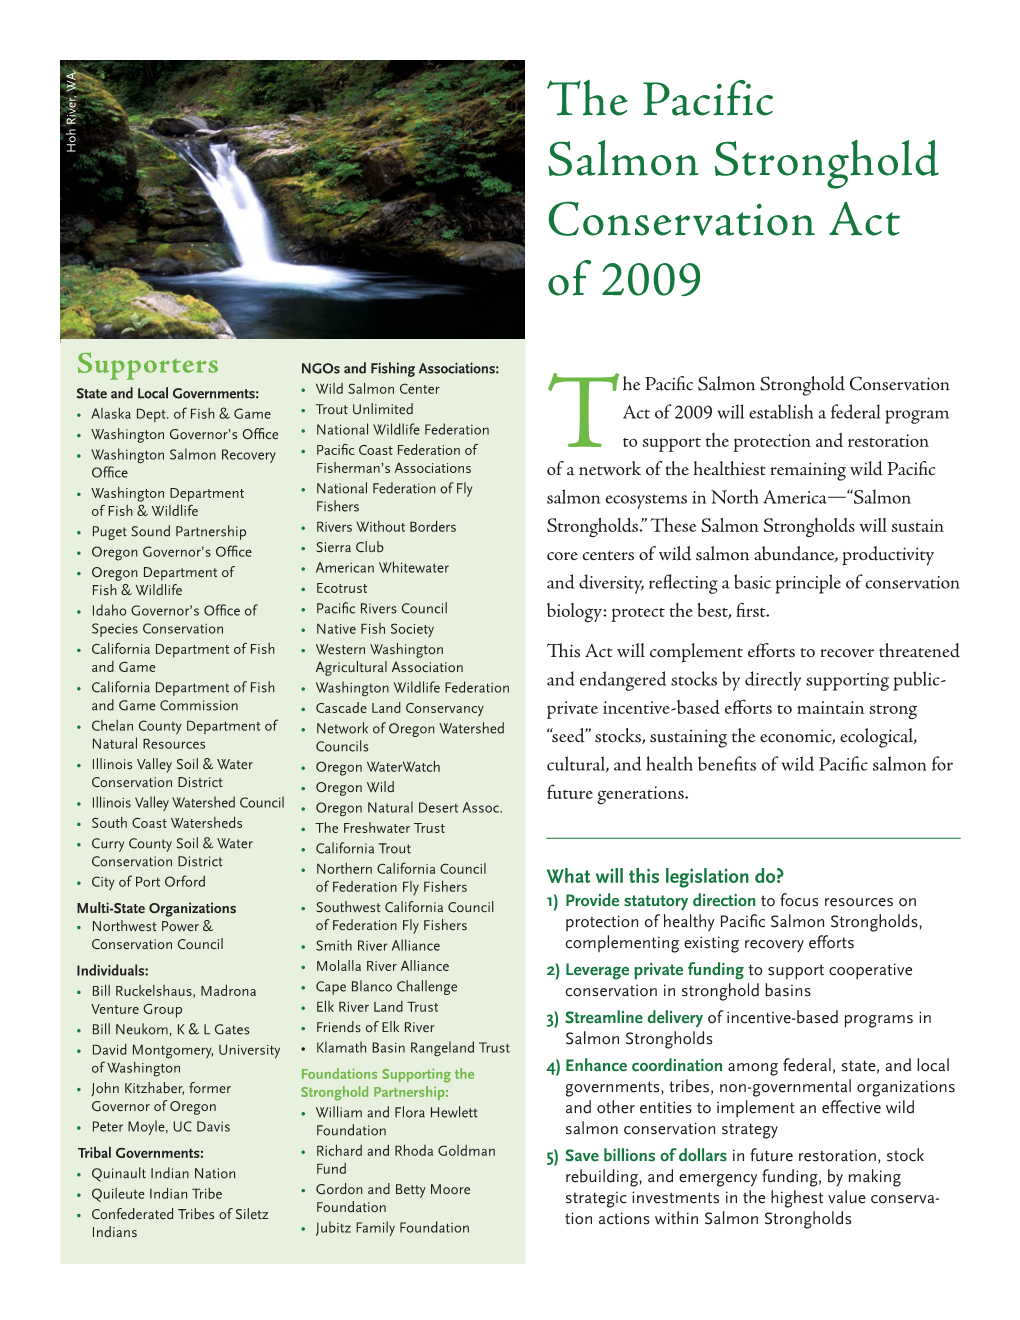 The Pacific Salmon Stronghold Conservation Act of 2009